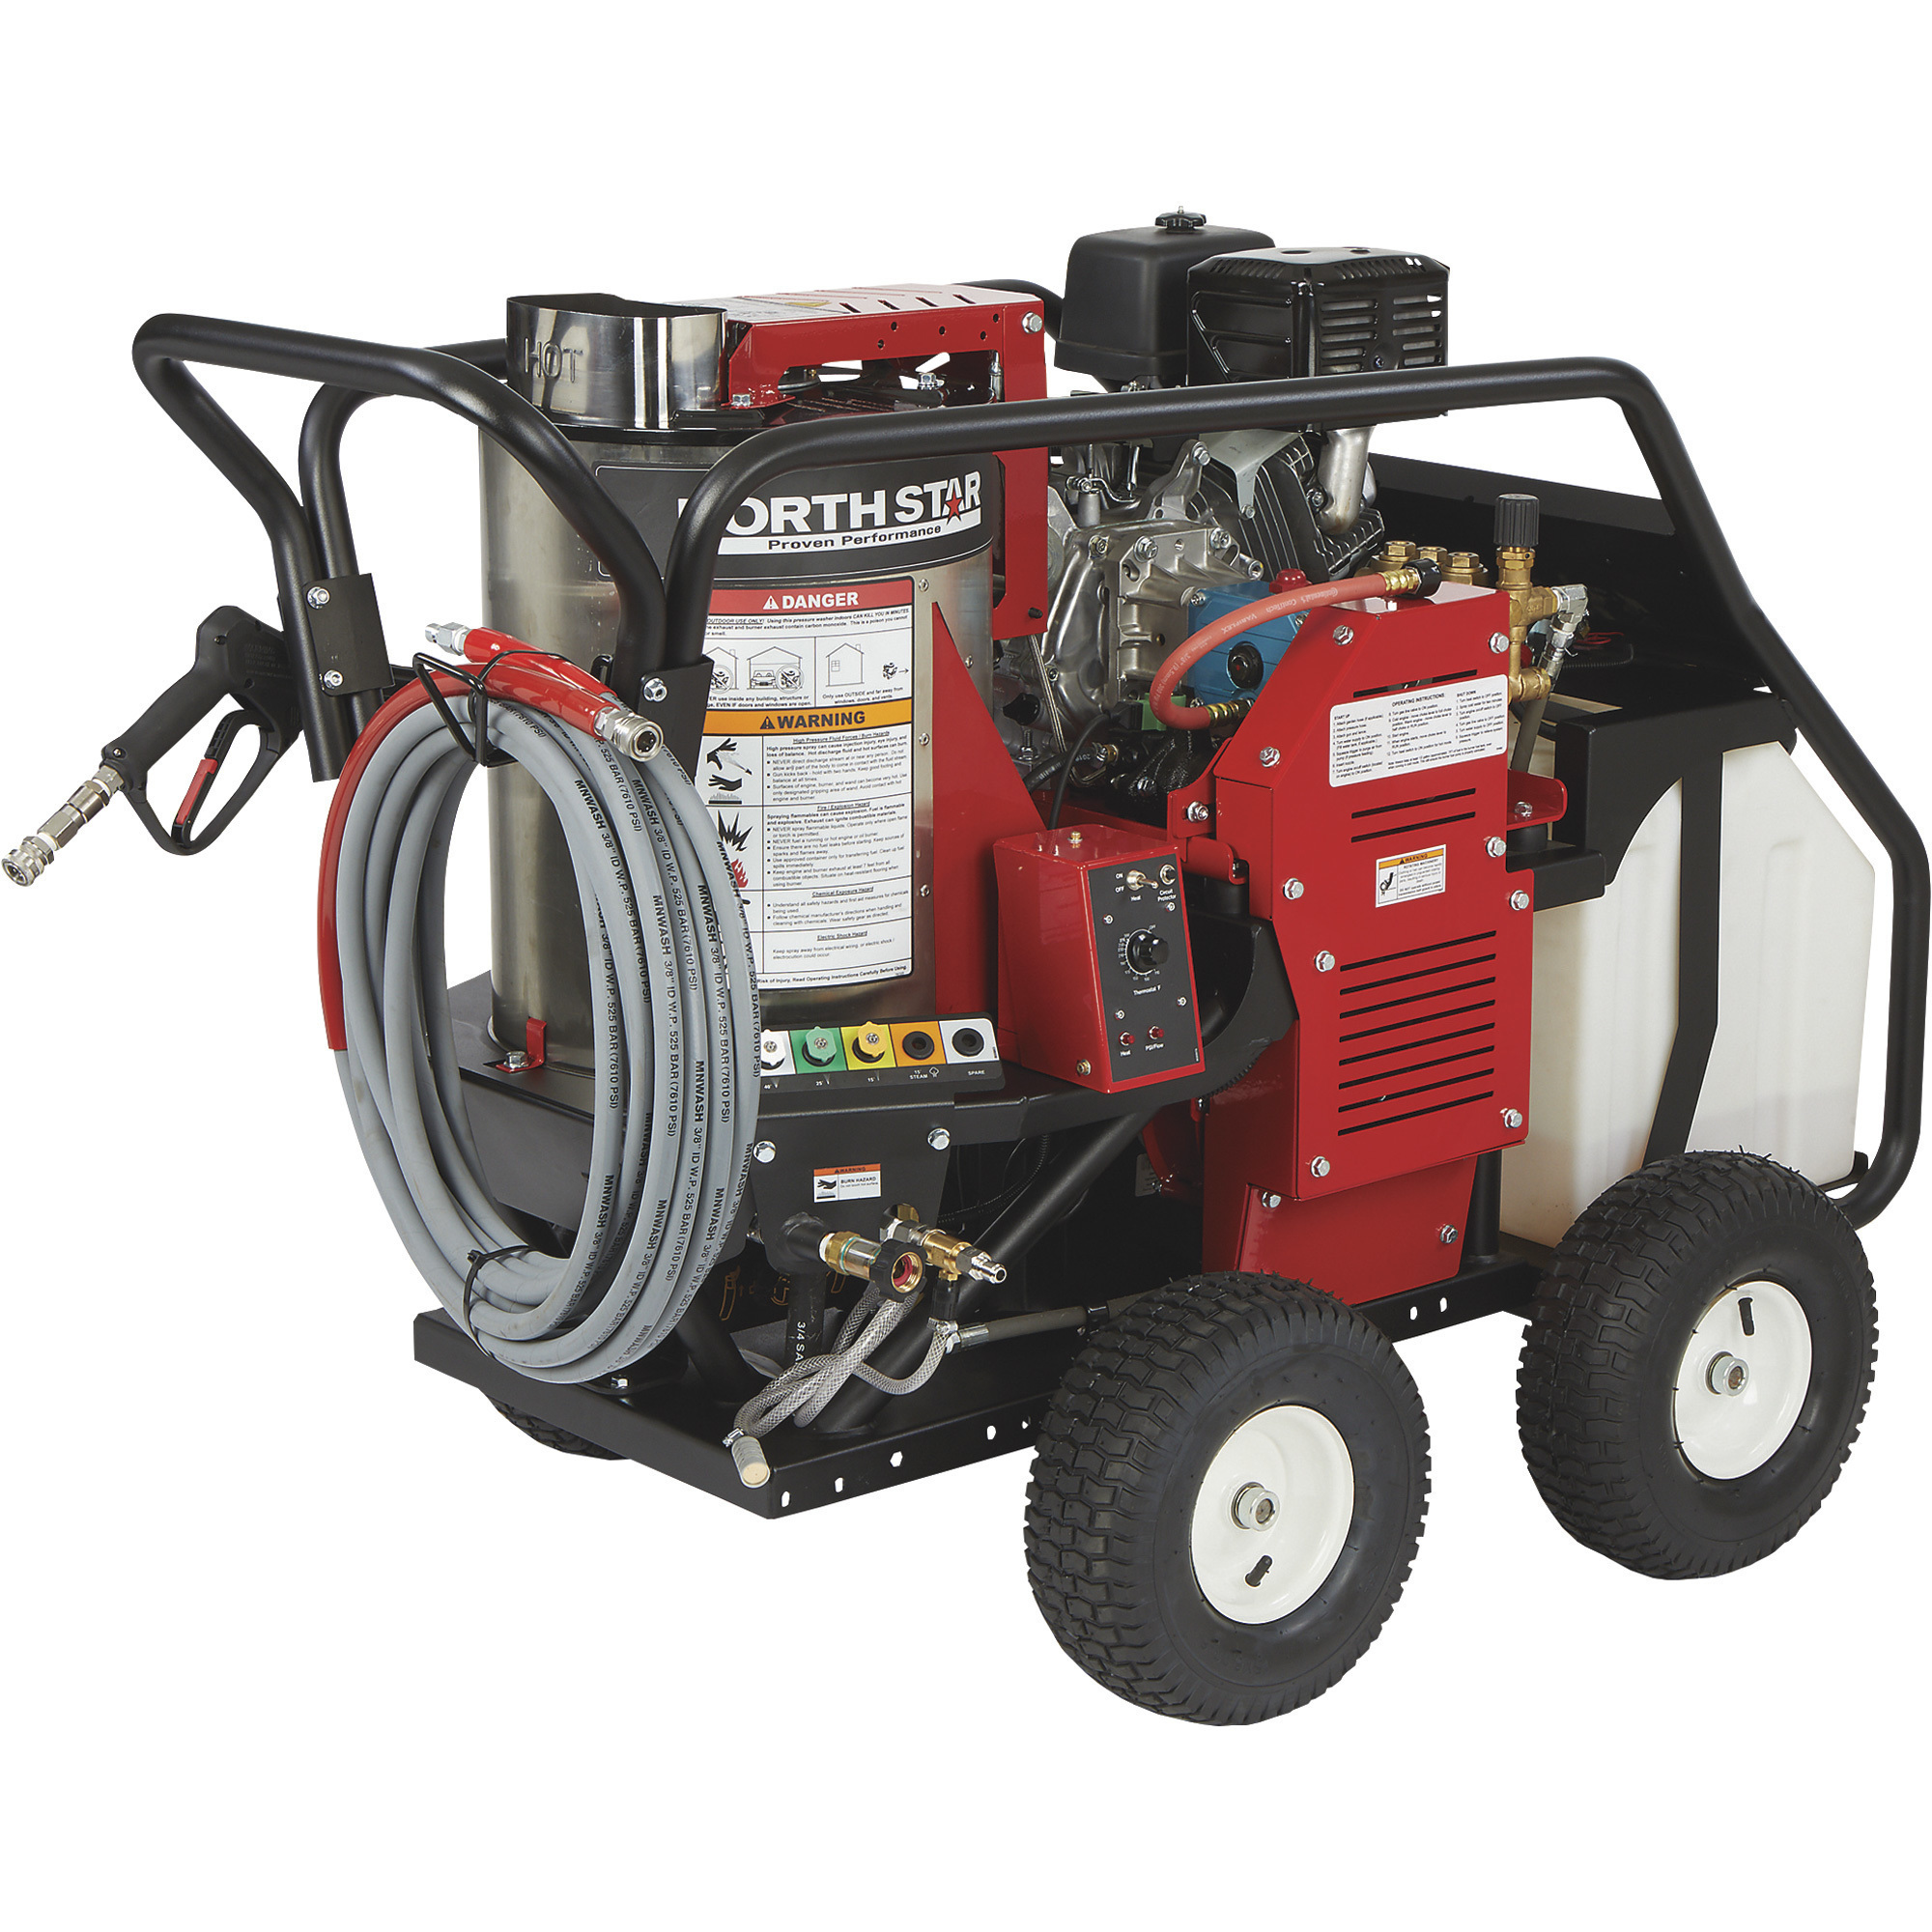 NorthStar 3500 PSI, 3.5 GPM Hot Water Pressure Washer with Wet Steam â Honda Engine, Model 157117